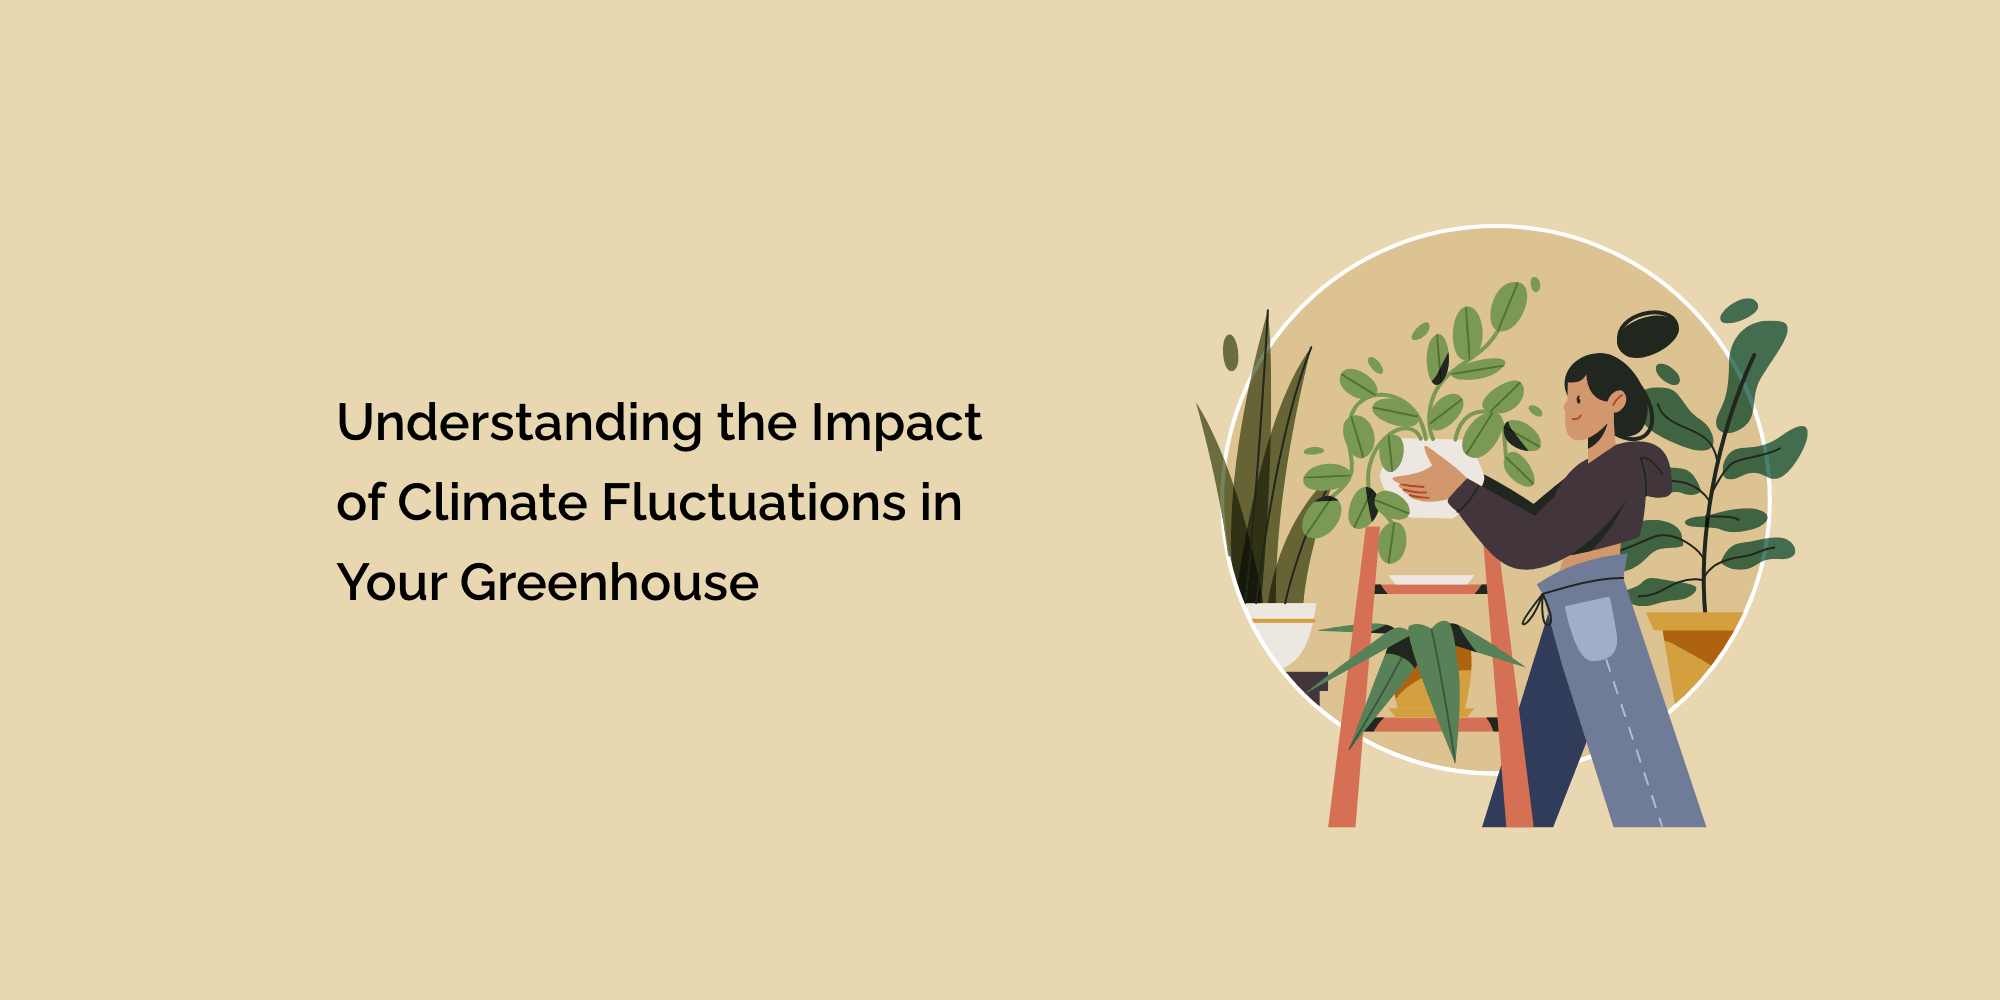 Understanding the Impact of Climate Fluctuations in Your Greenhouse